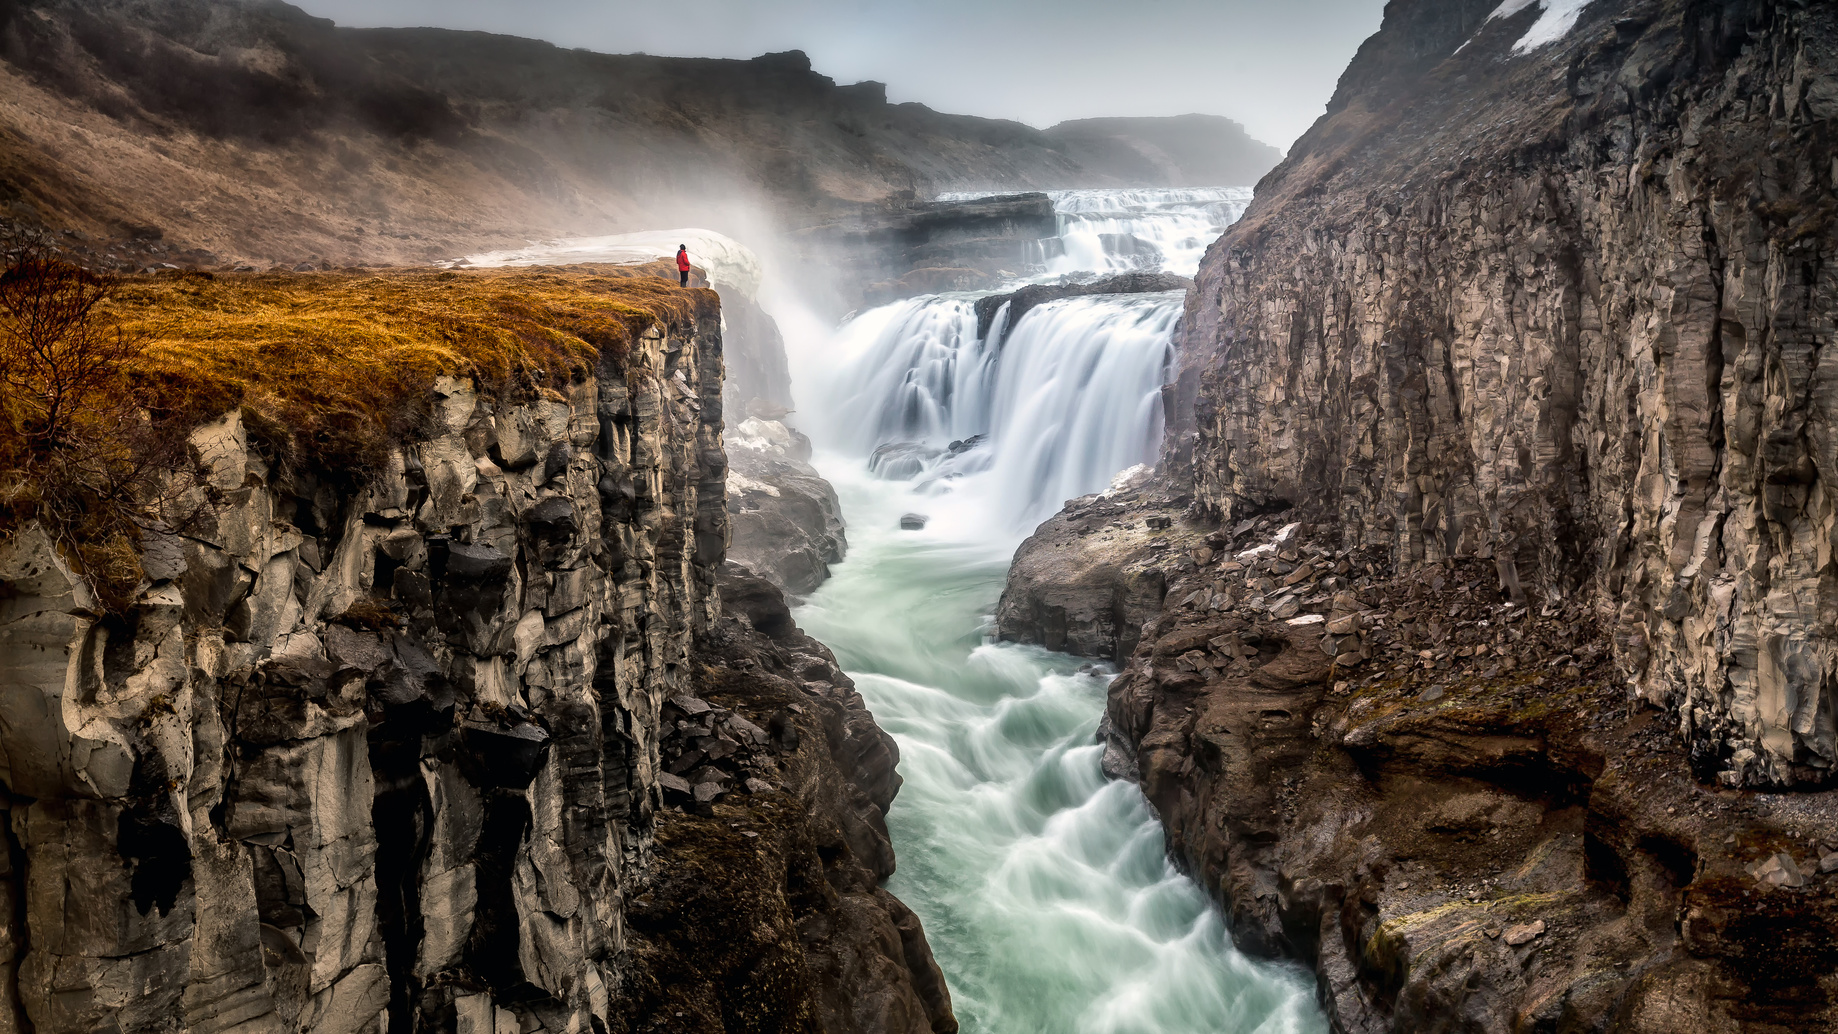 Man watching waterfall from cliff